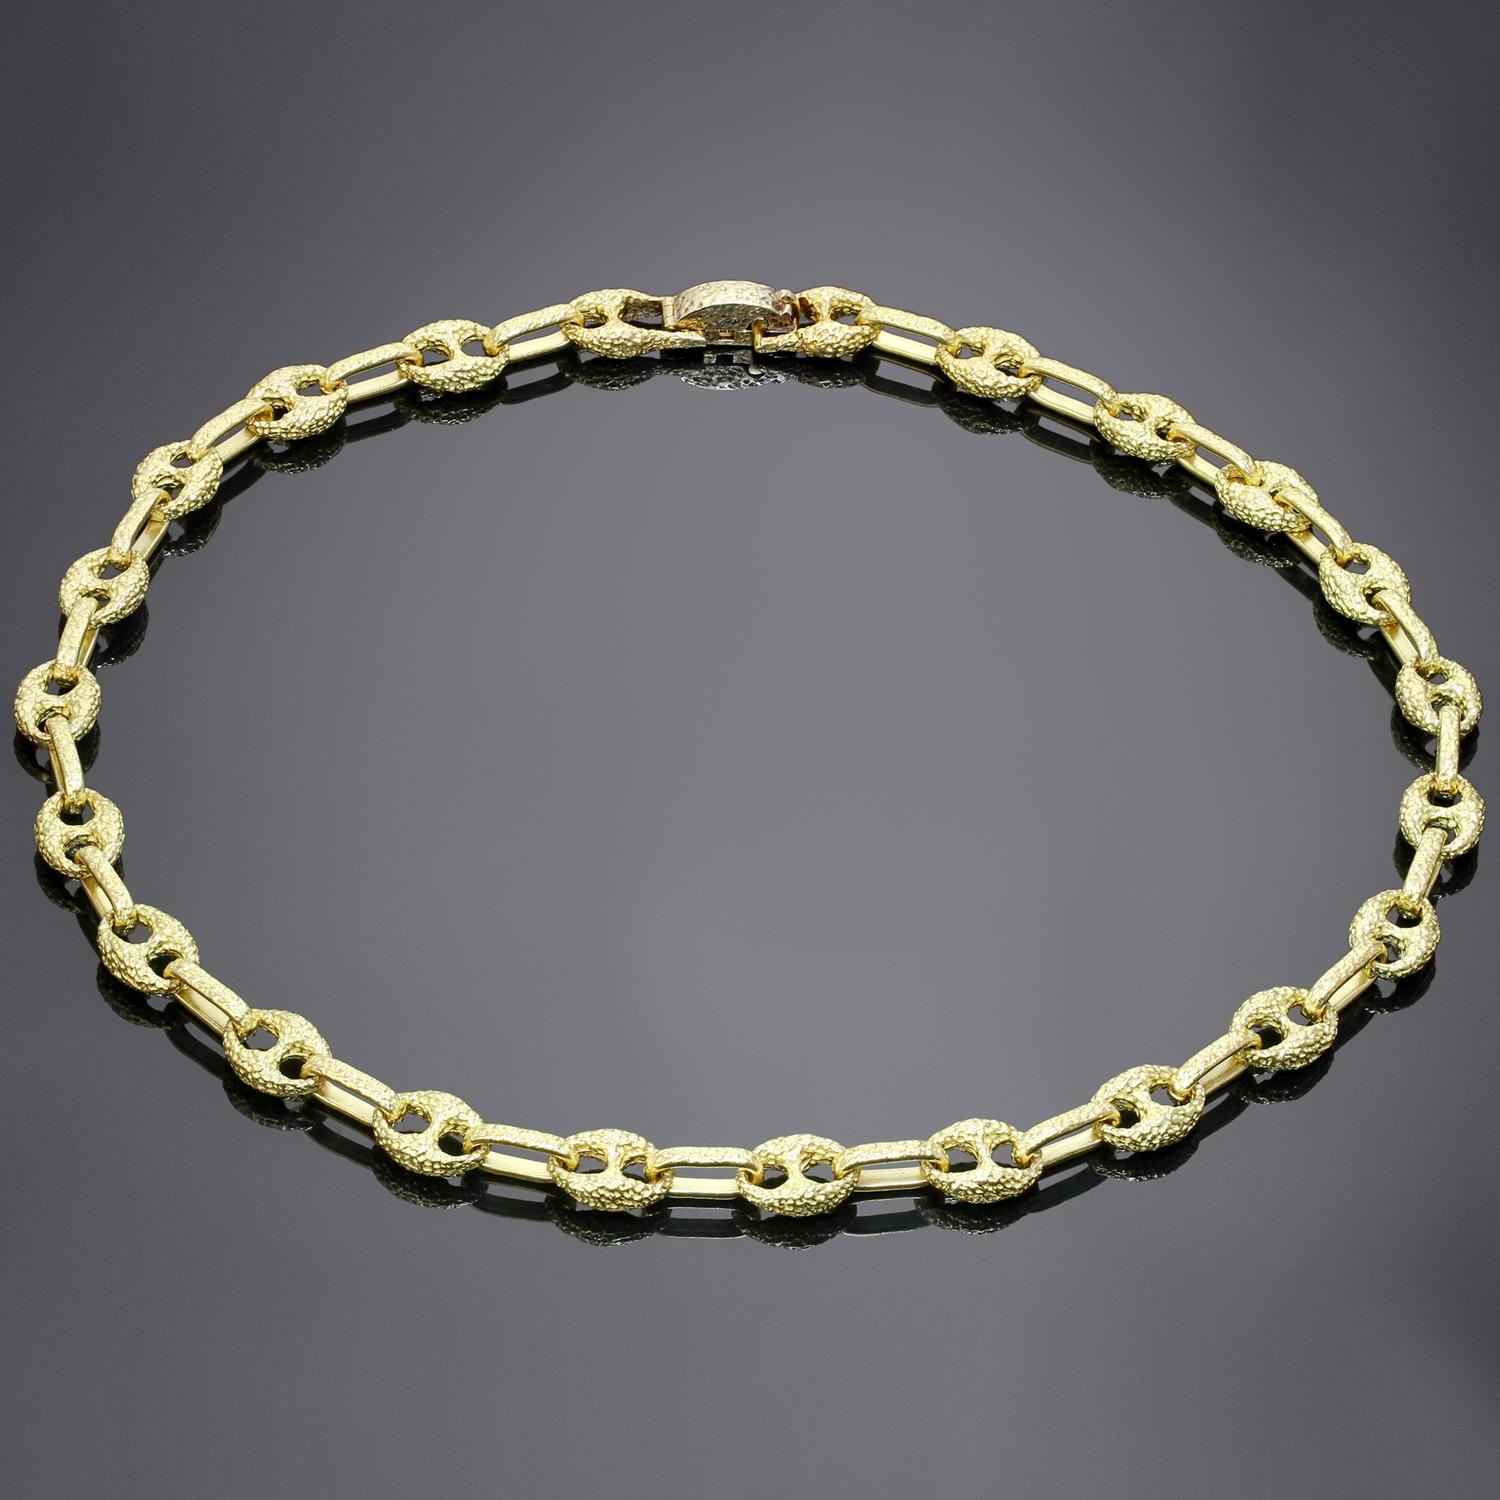 This iconic vintage Gucci necklace feature a chic link chain design crafted in 18k textured yellow gold. Made in Italy circa 1980s. Measurements: 0.31